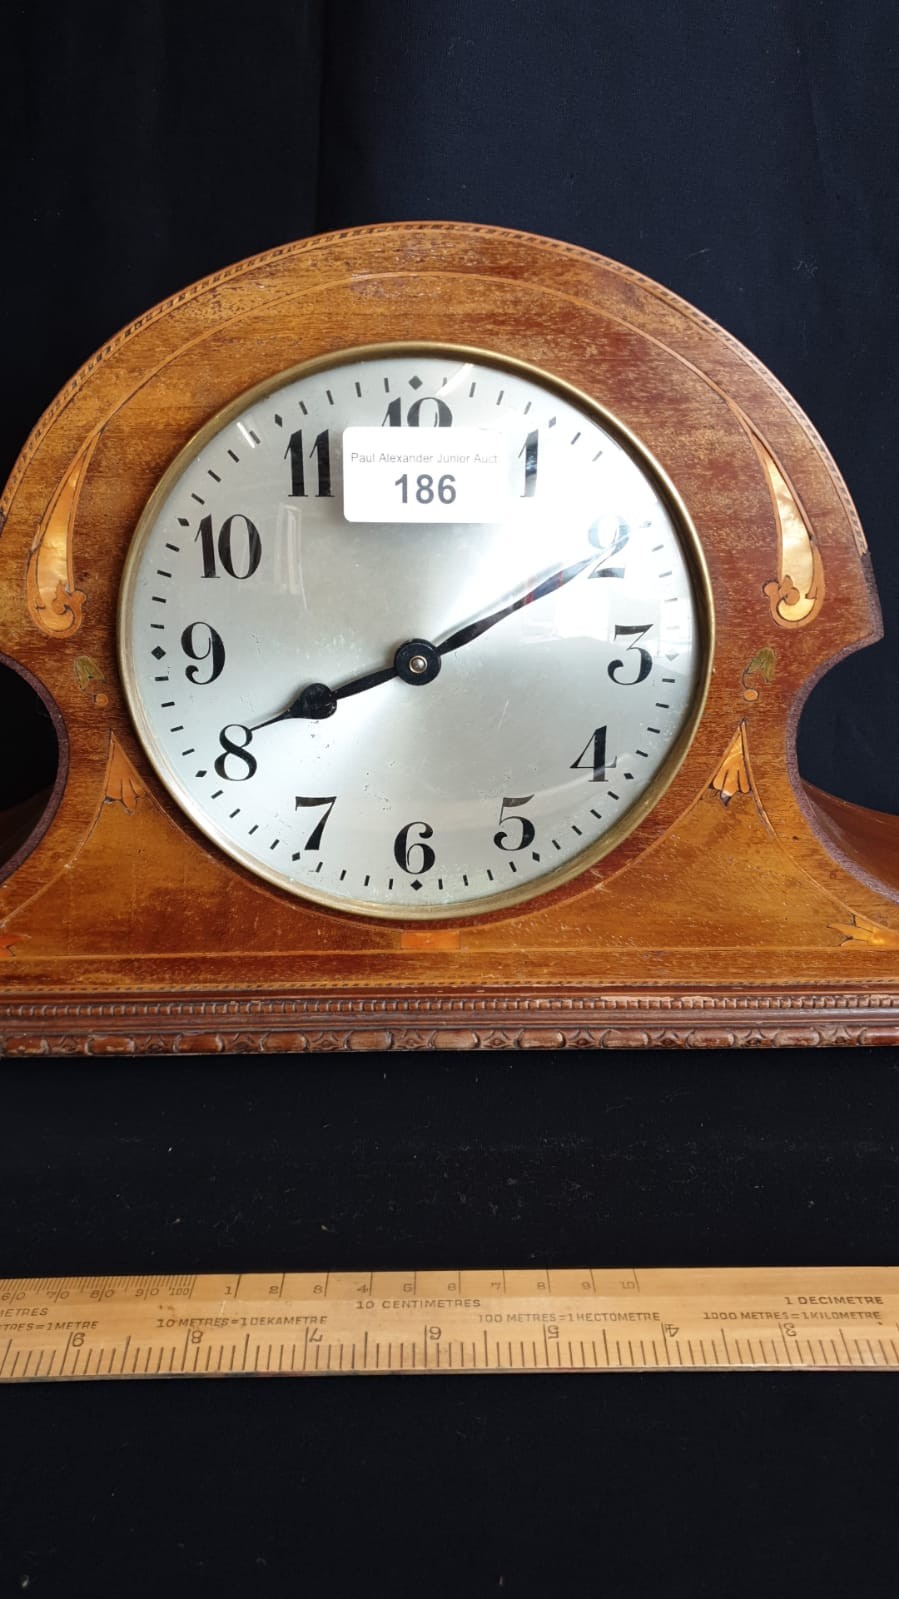 Key Wind Edwardian Mantel Clock With Beautiful Mother Of Pearl Inlays - Image 2 of 2